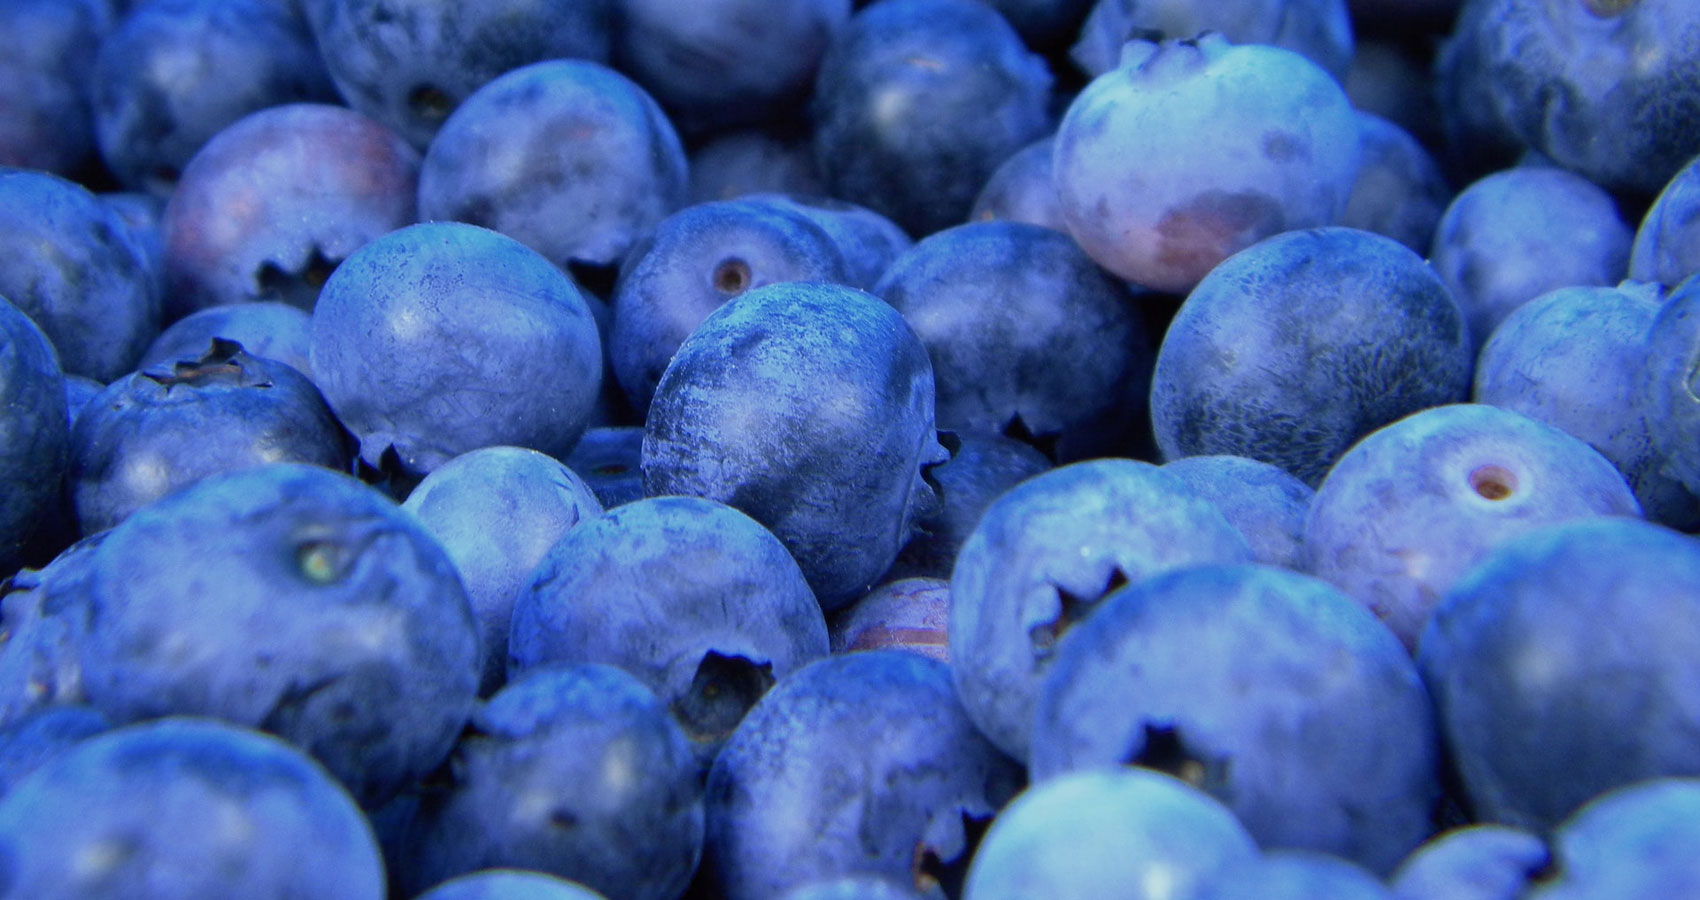 Blueberry Banter & Blueberry Blues, poetry by Fay Marmalich-Vietmeier at Spillwords.com